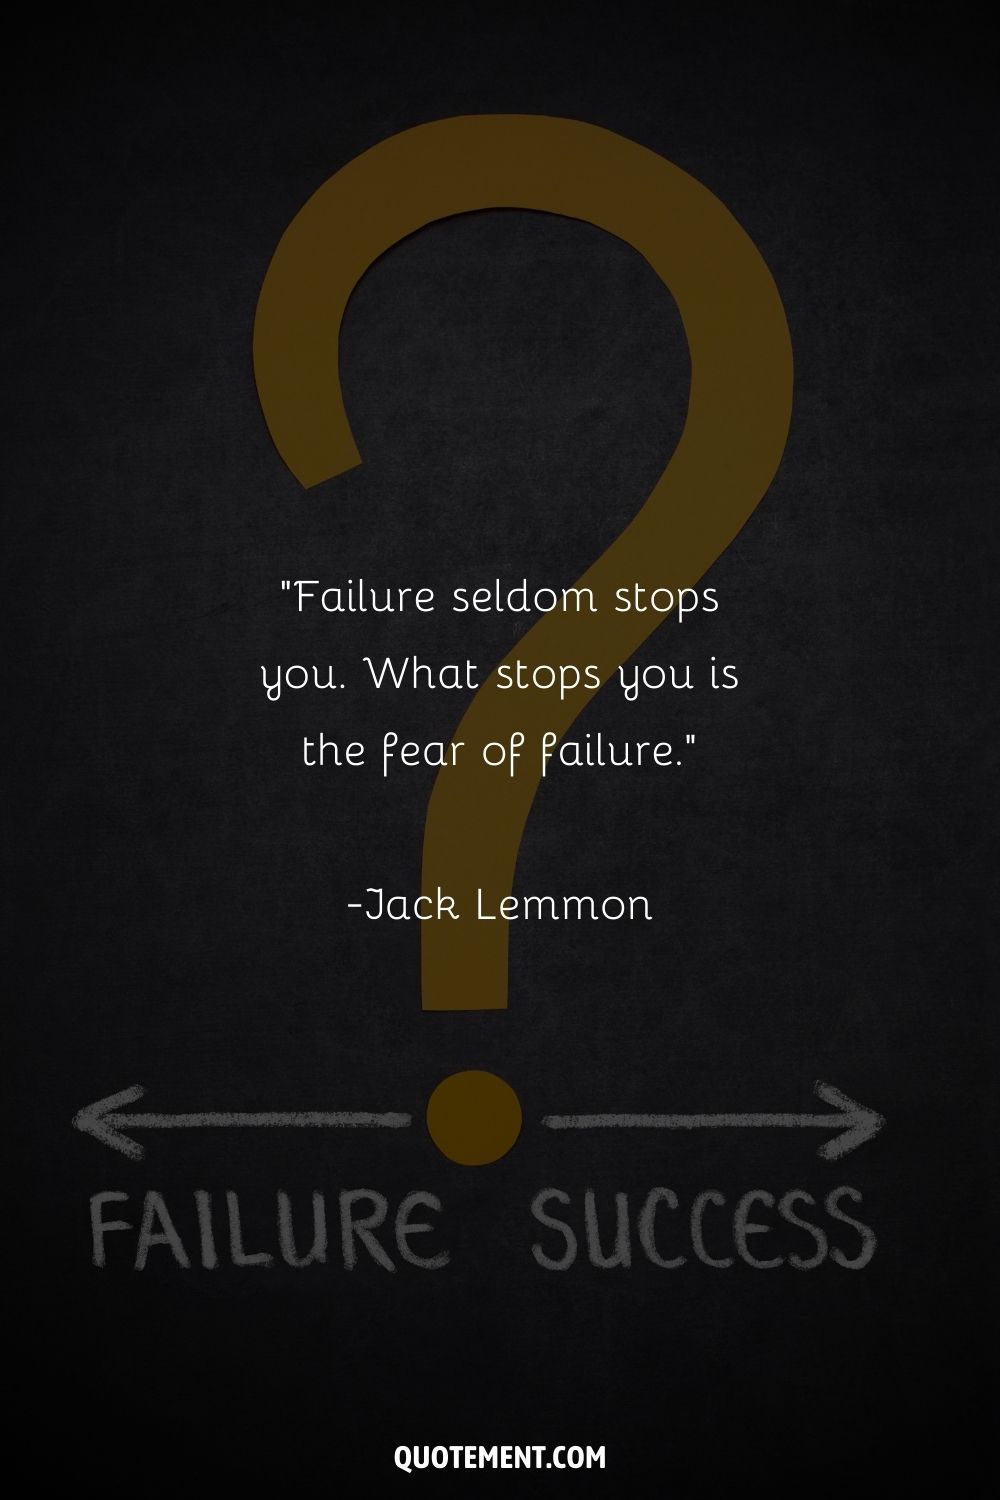 “Failure seldom stops you. What stops you is the fear of failure.” ― Jack Lemmon